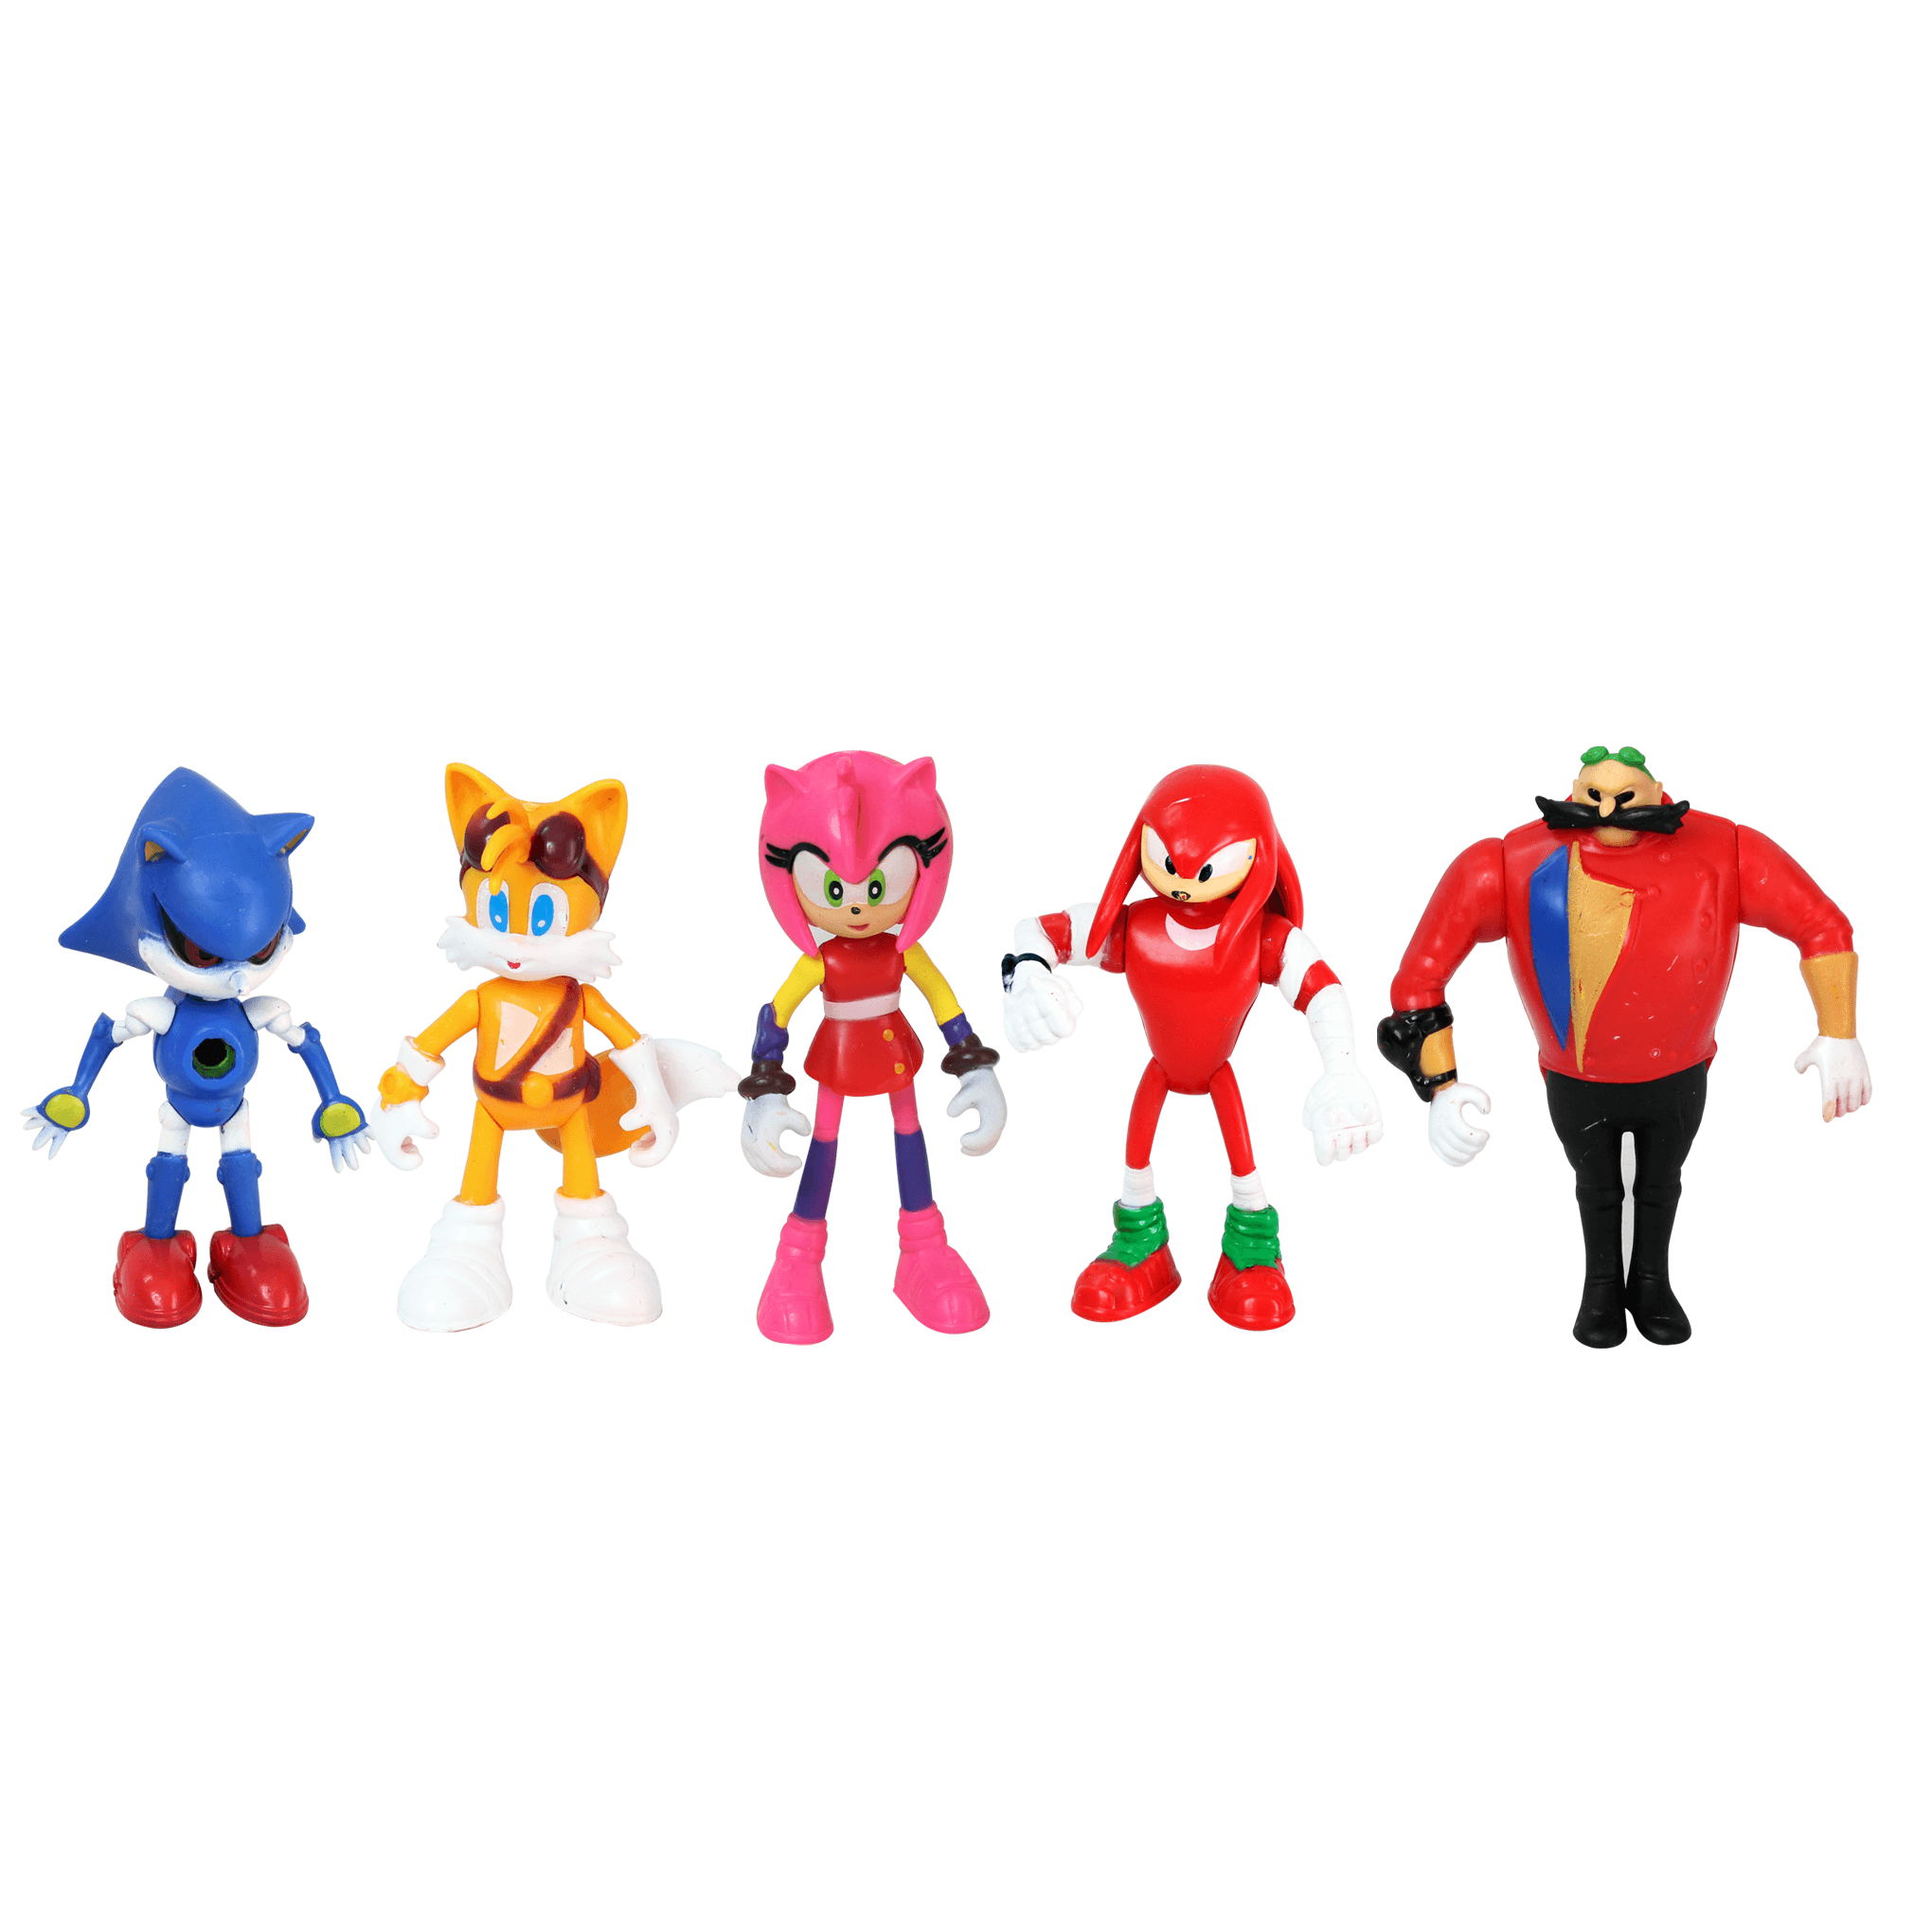 6 in 1 Sonic Action Figures Set Model A - BumbleToys - 5-7 Years, Action Figure, Action Figures, Boys, Sonic, Toy Land